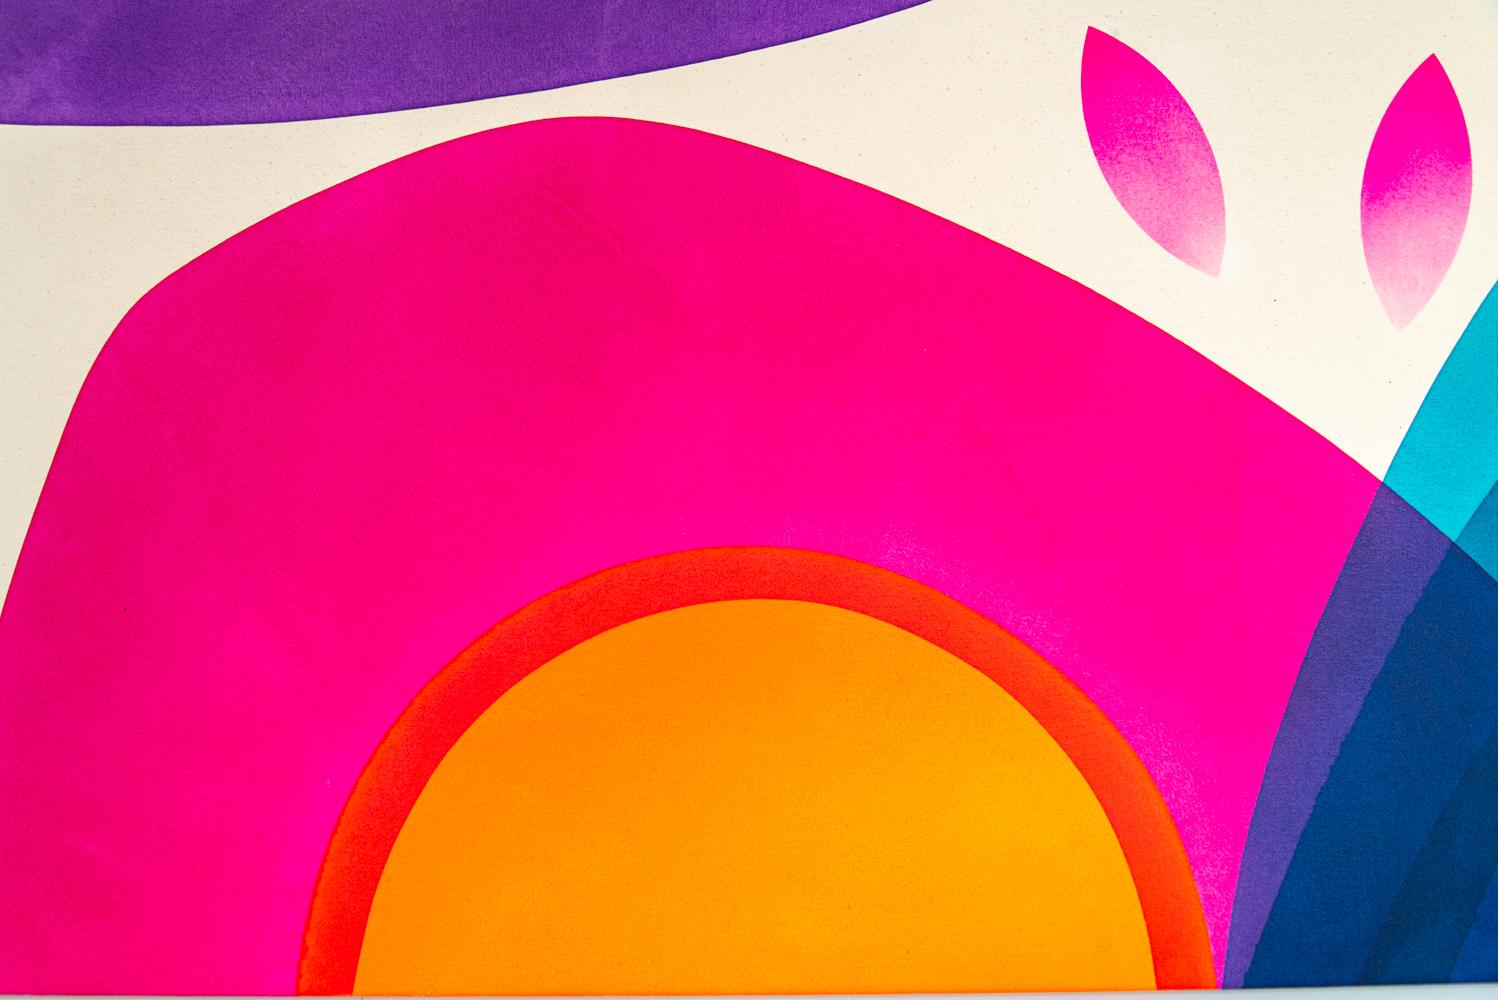 Colour—bright pink, orange, purple, yellow, turquoise and mustard pops in this new abstract work by Calgary artist Aron Hill. Bold shapes float across the canvas…the yellow sun in the corner, seven pink leaves dance in the center. Hill is known for